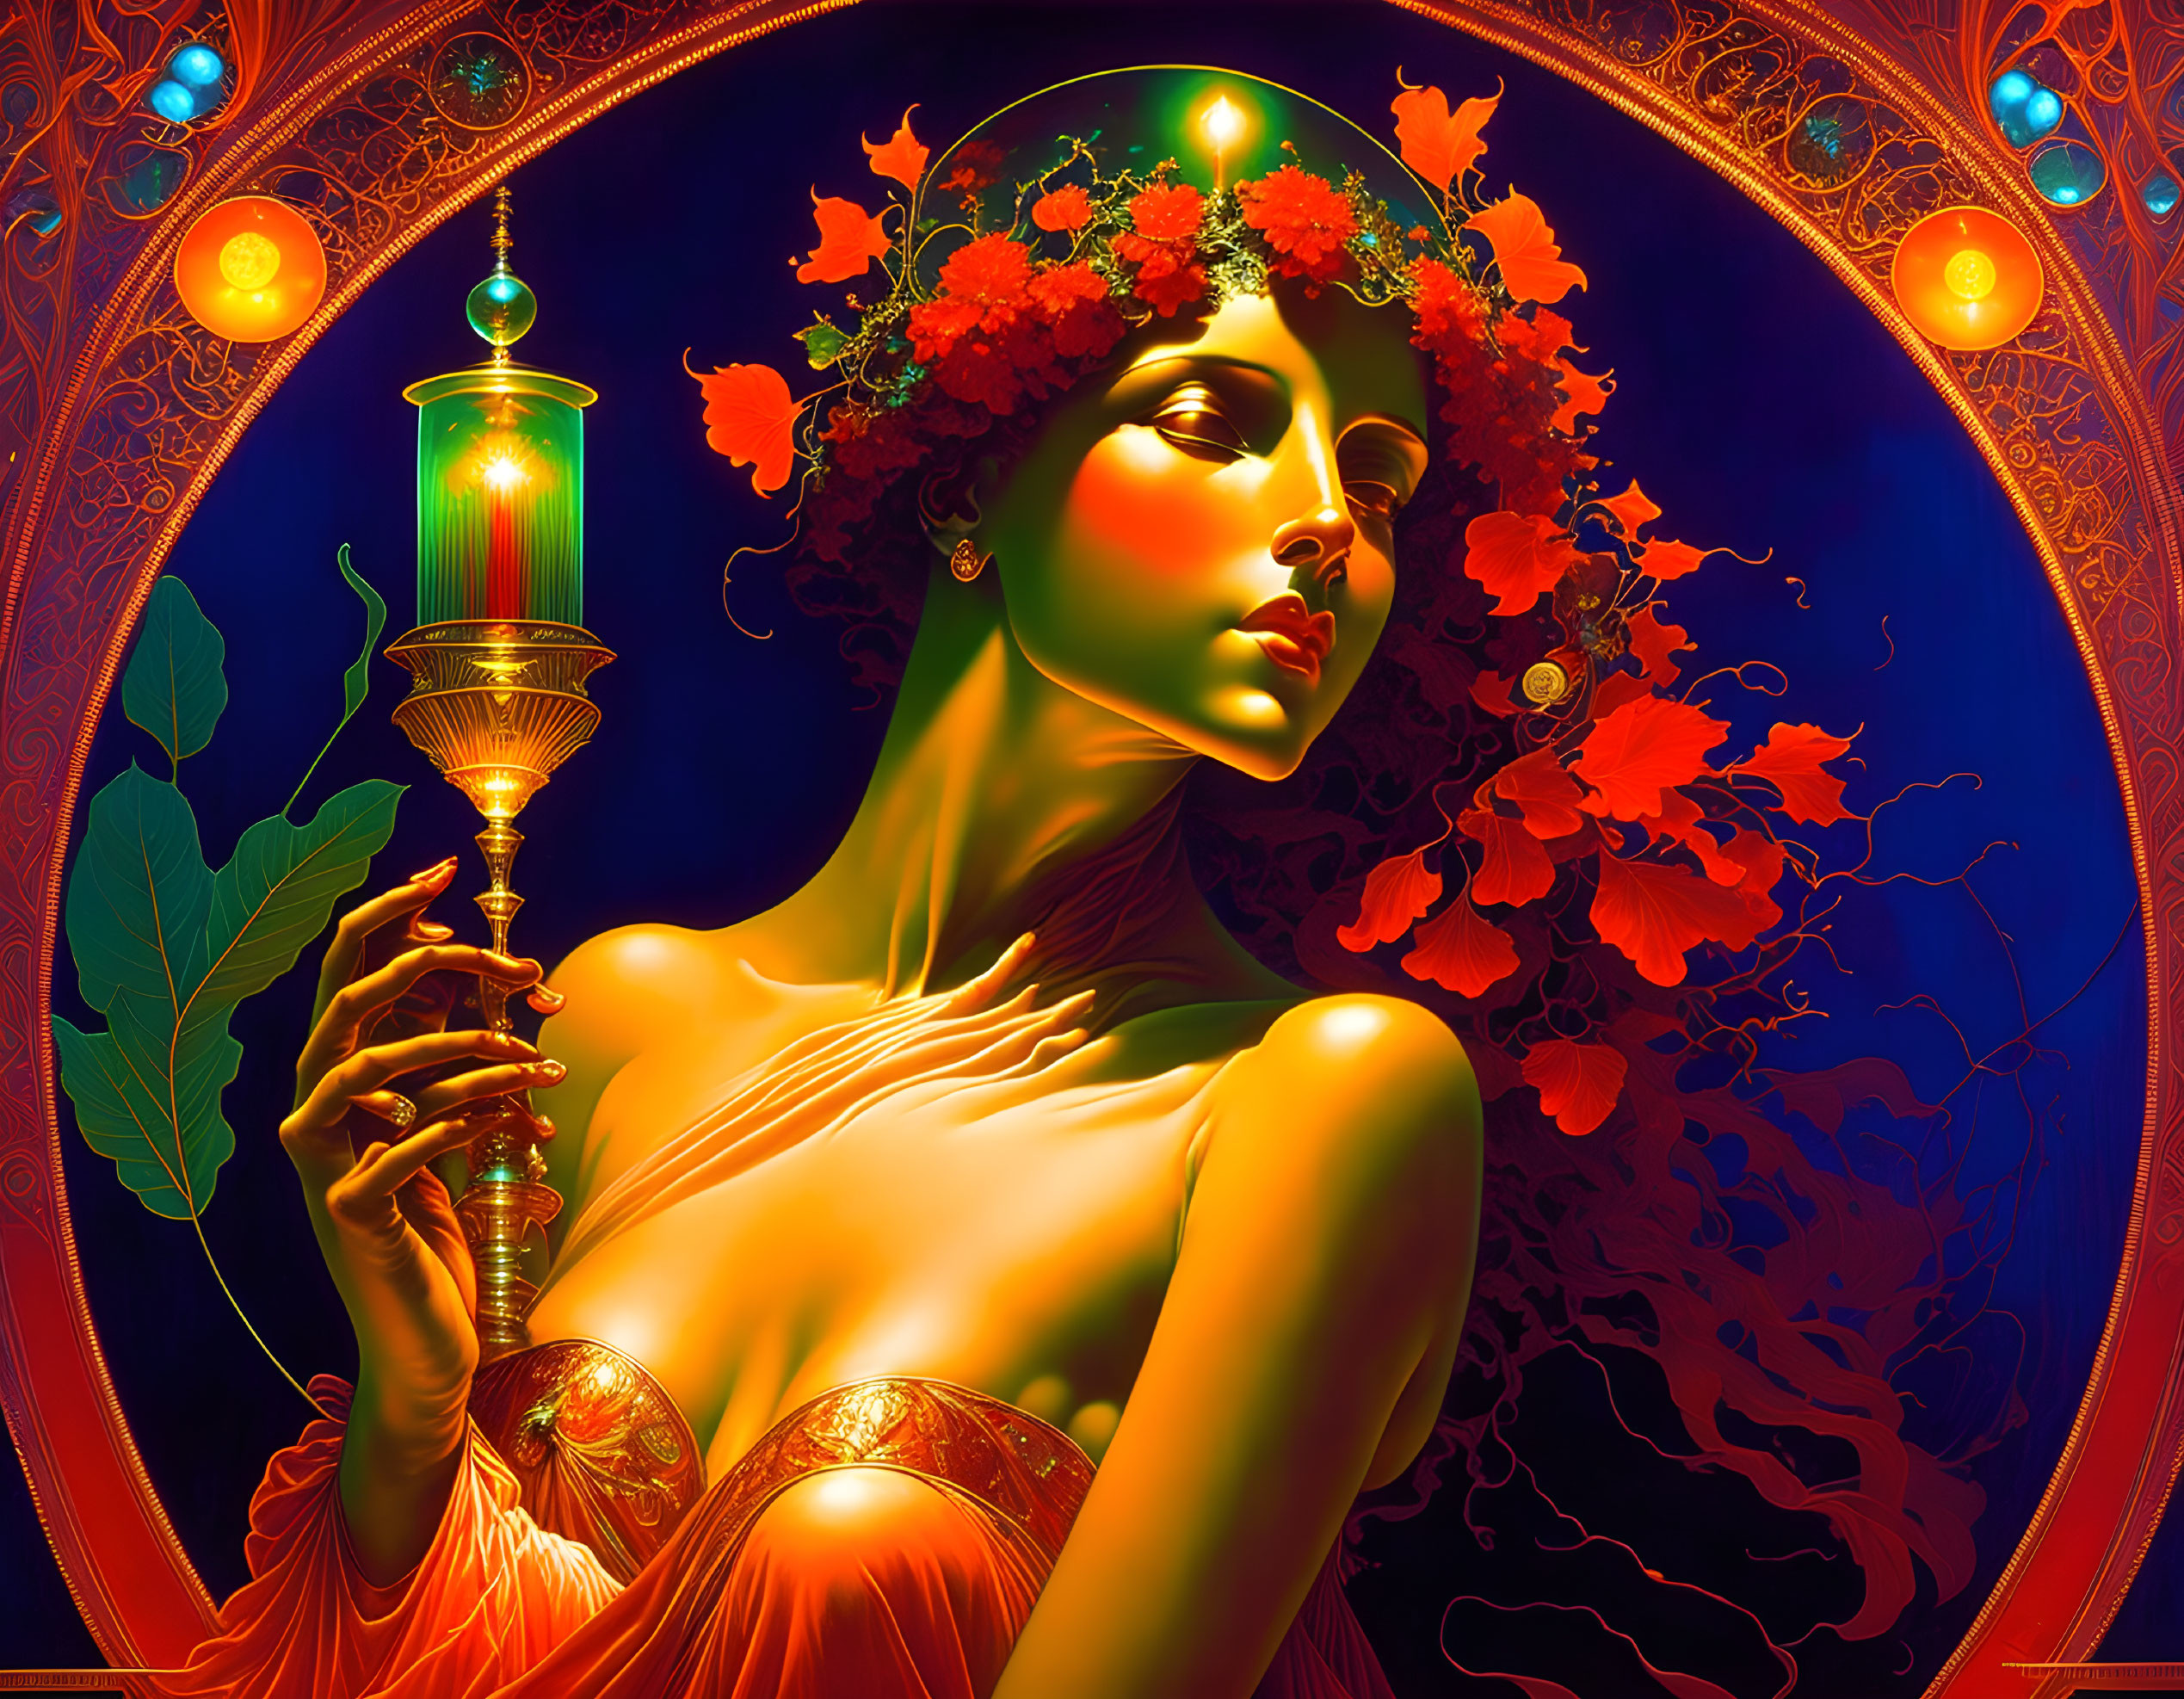 Colorful artwork of woman with red flowers and lantern in circular border on blue background